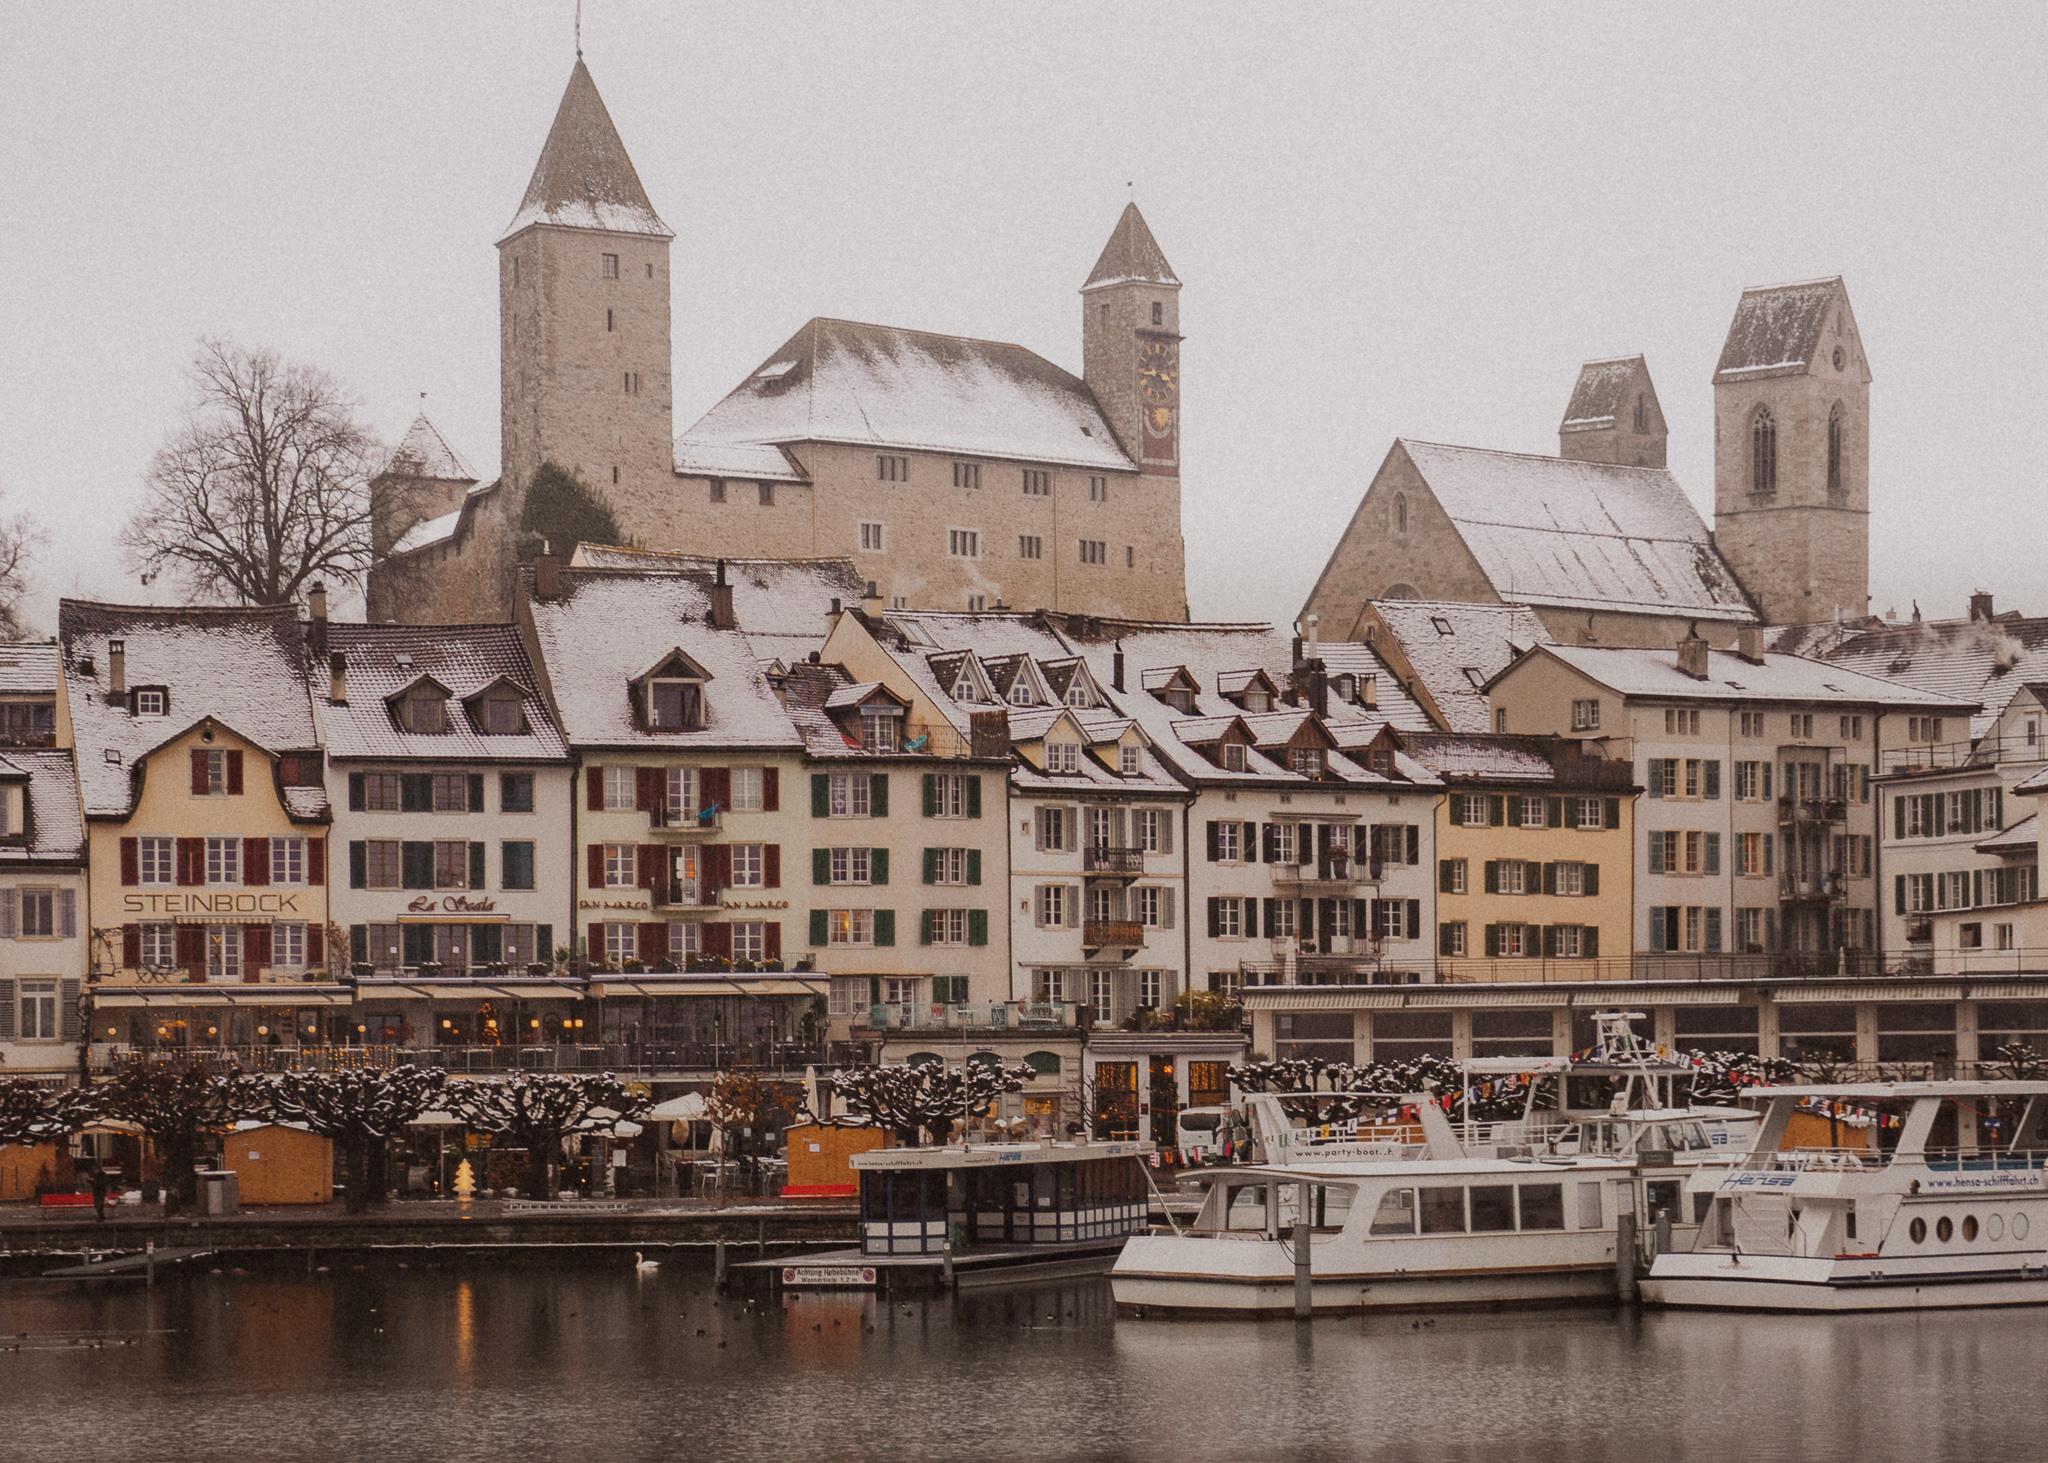 Rapperswil castle and the town below it on a winter day with snow on the roofs and the lake in front of it